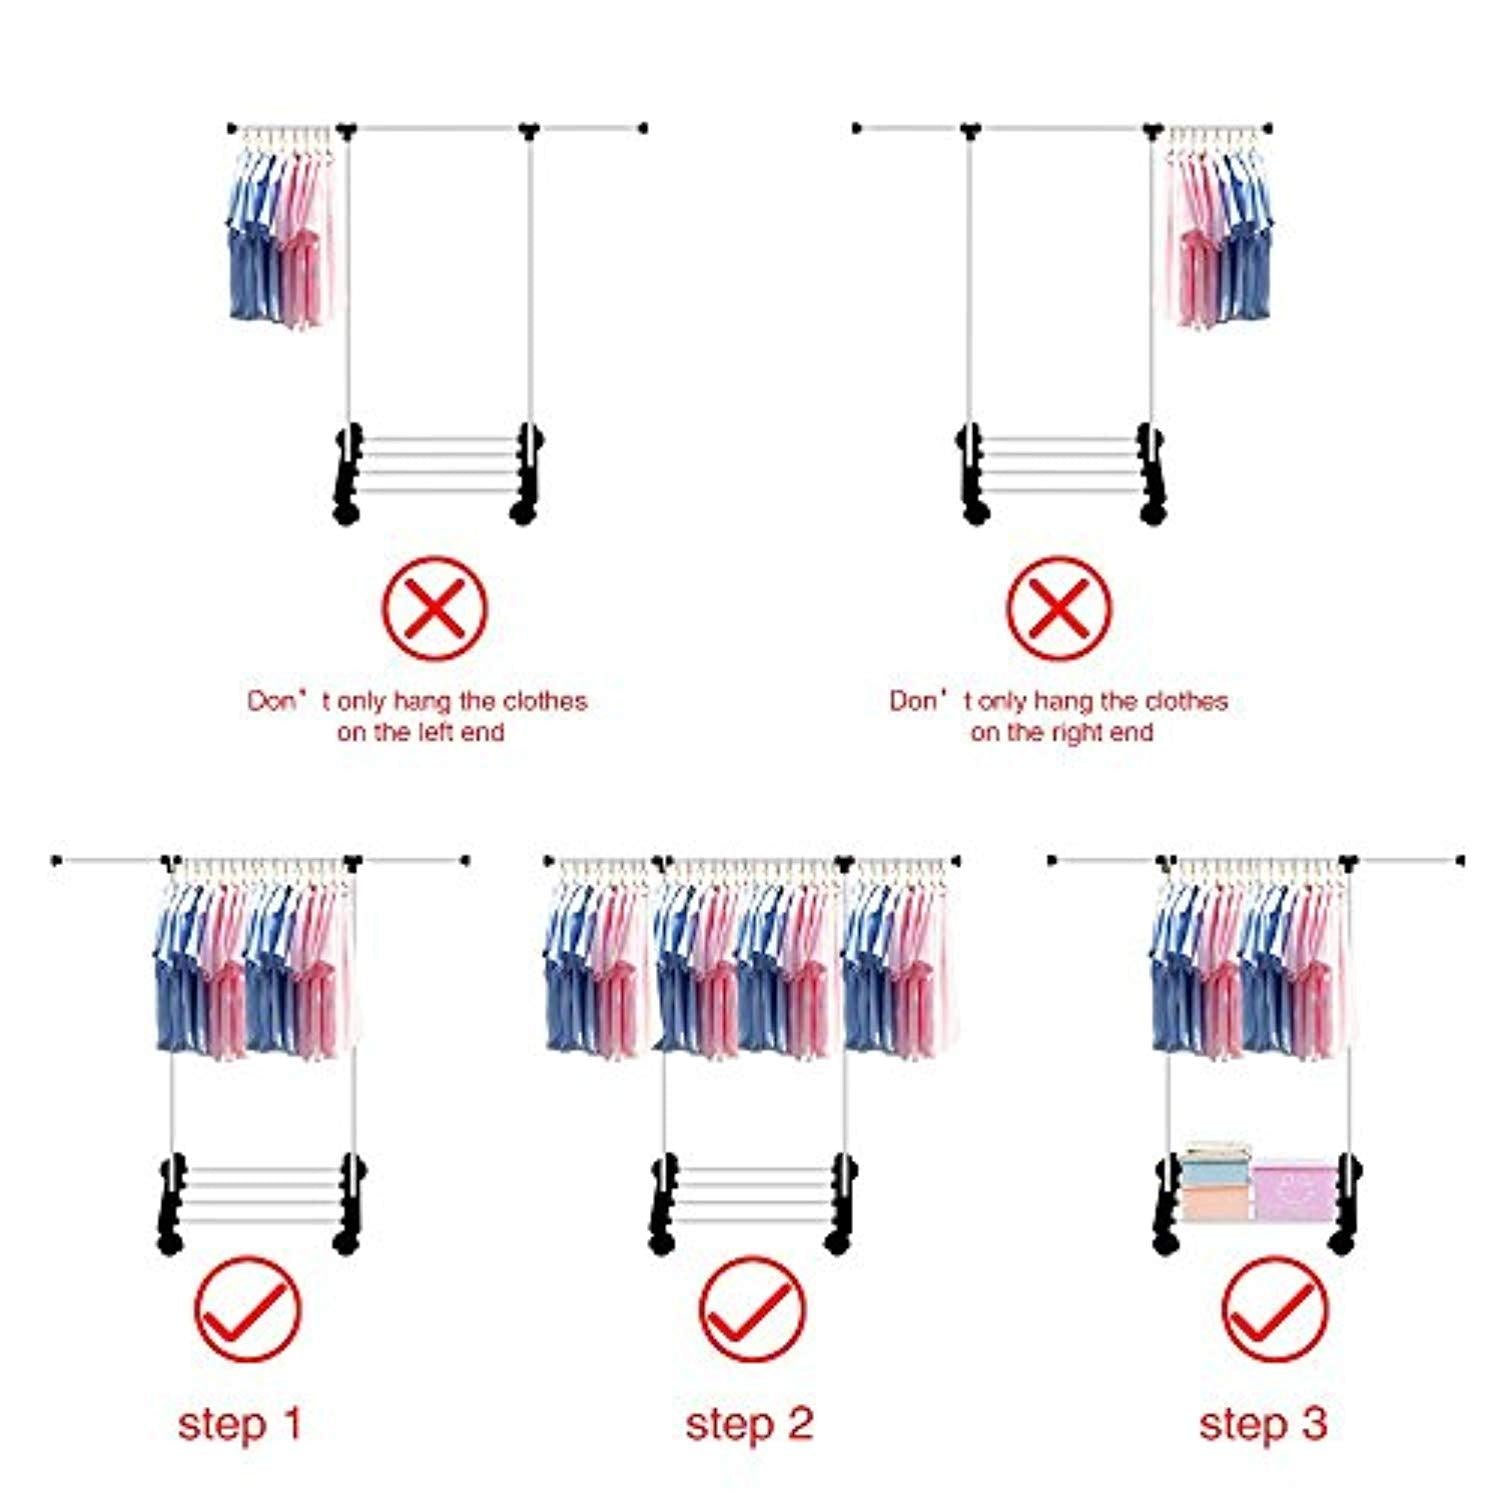 Bosonshop Clothes Racks for Hanging Clothes Drying Clothes Inside with Tiers Storage Shelves